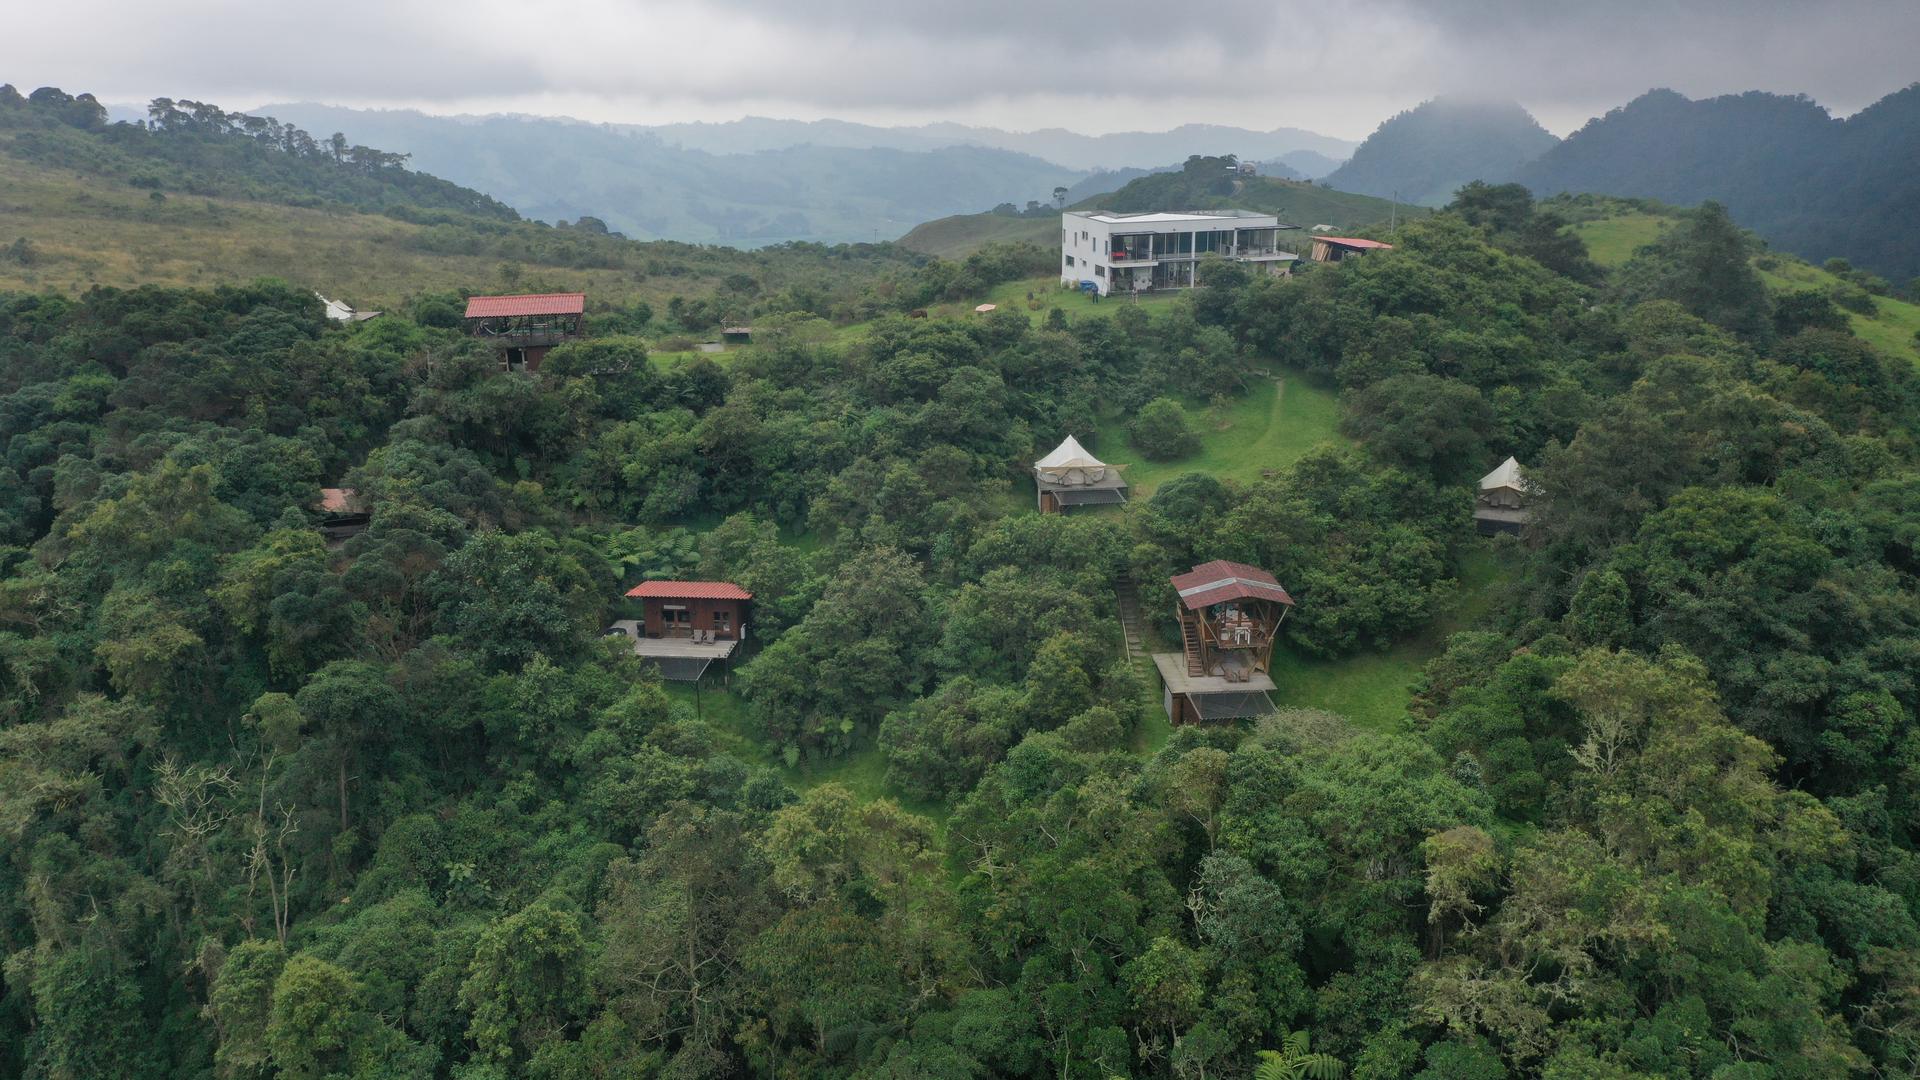 At El Color de Mis Reves, or The Color of My Dreams, most of the land is covered by cloud forests. The owner wants the forest to regrow to give the wildlife more space. 